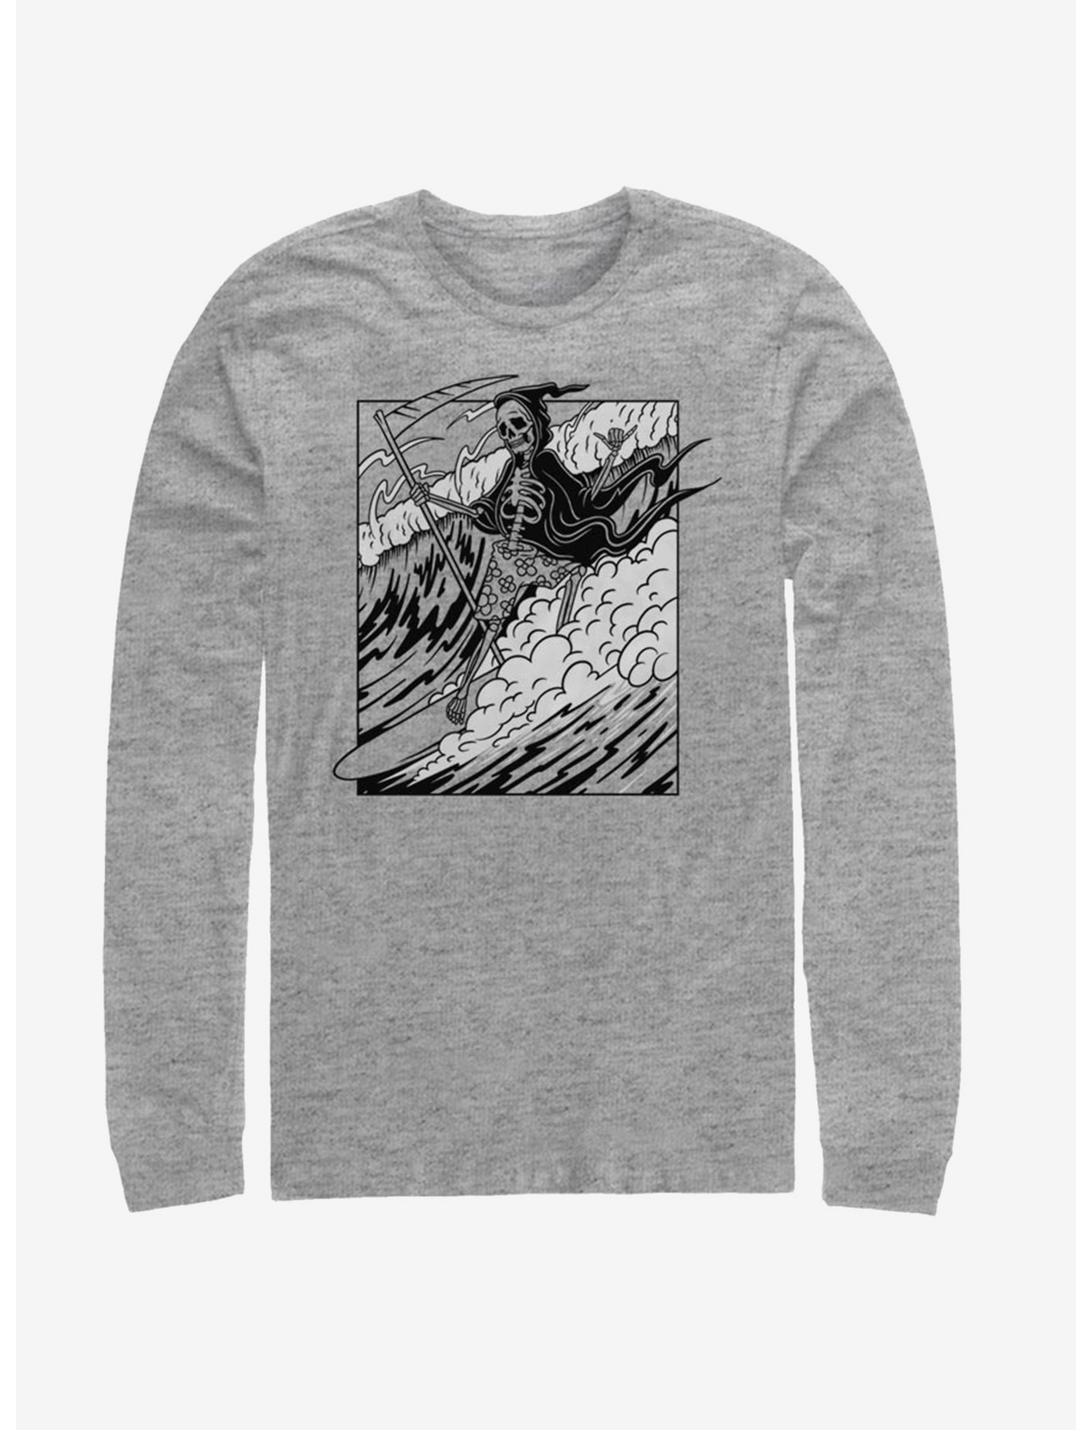 Grim Reaper Surfing Long-Sleeve T-Shirt, ATH HTR, hi-res